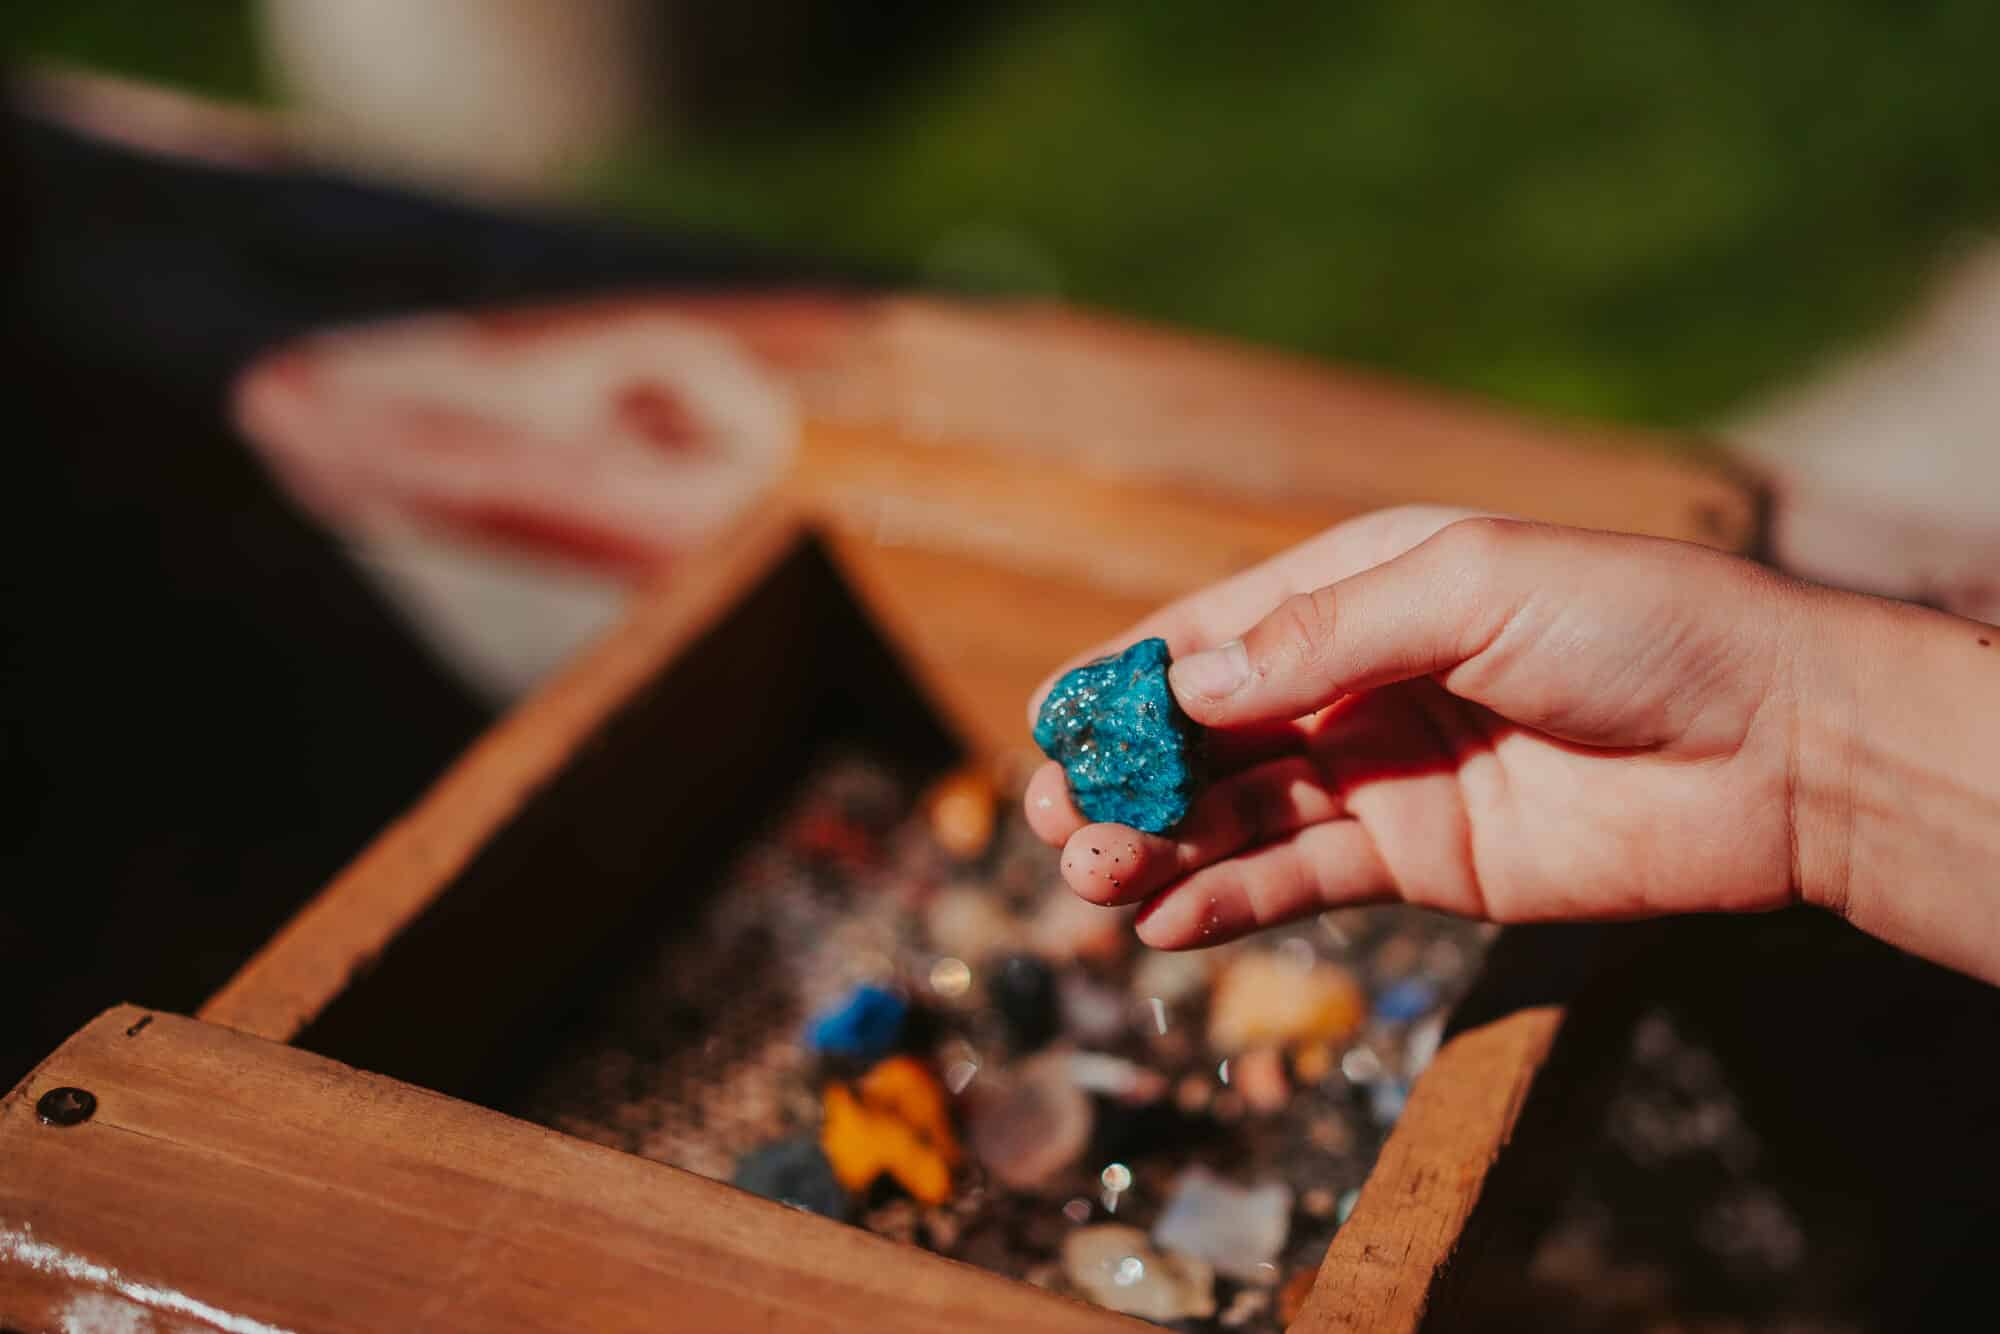 Detailed shot of one of the turquoise gems found at the treasure panning trough